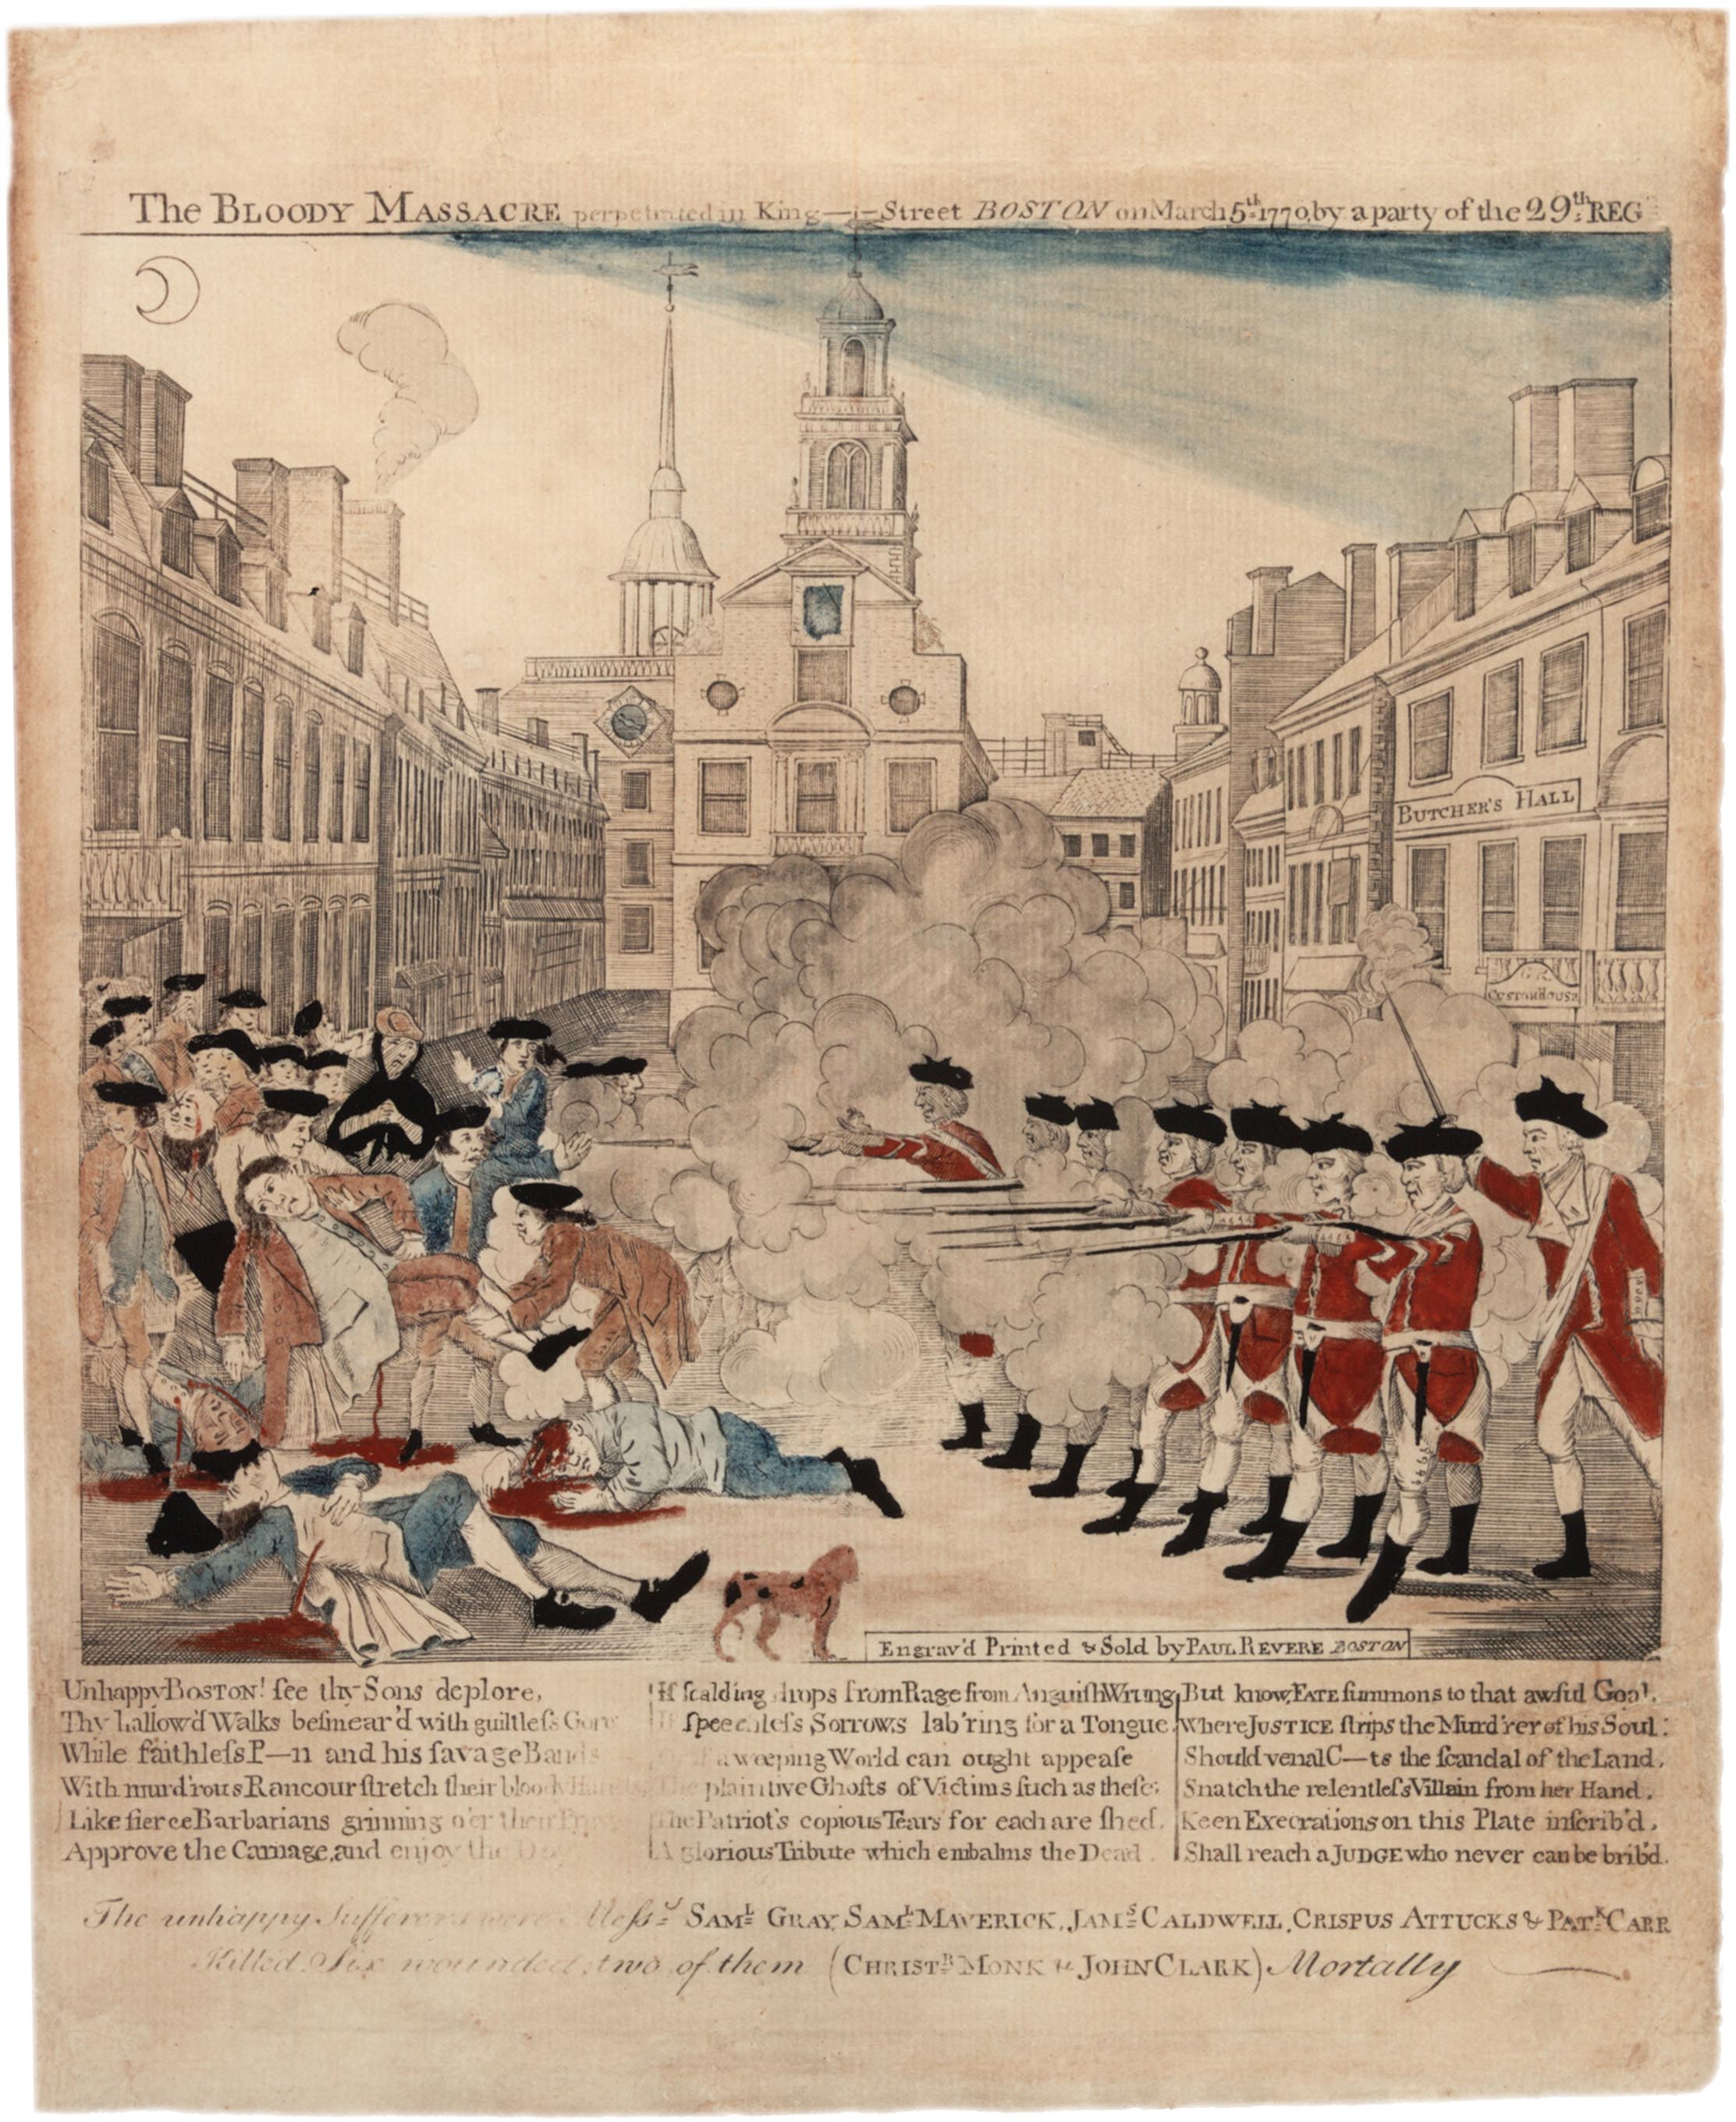 Why Was the Boston Massacre Important? - Lesson for Kids - Video